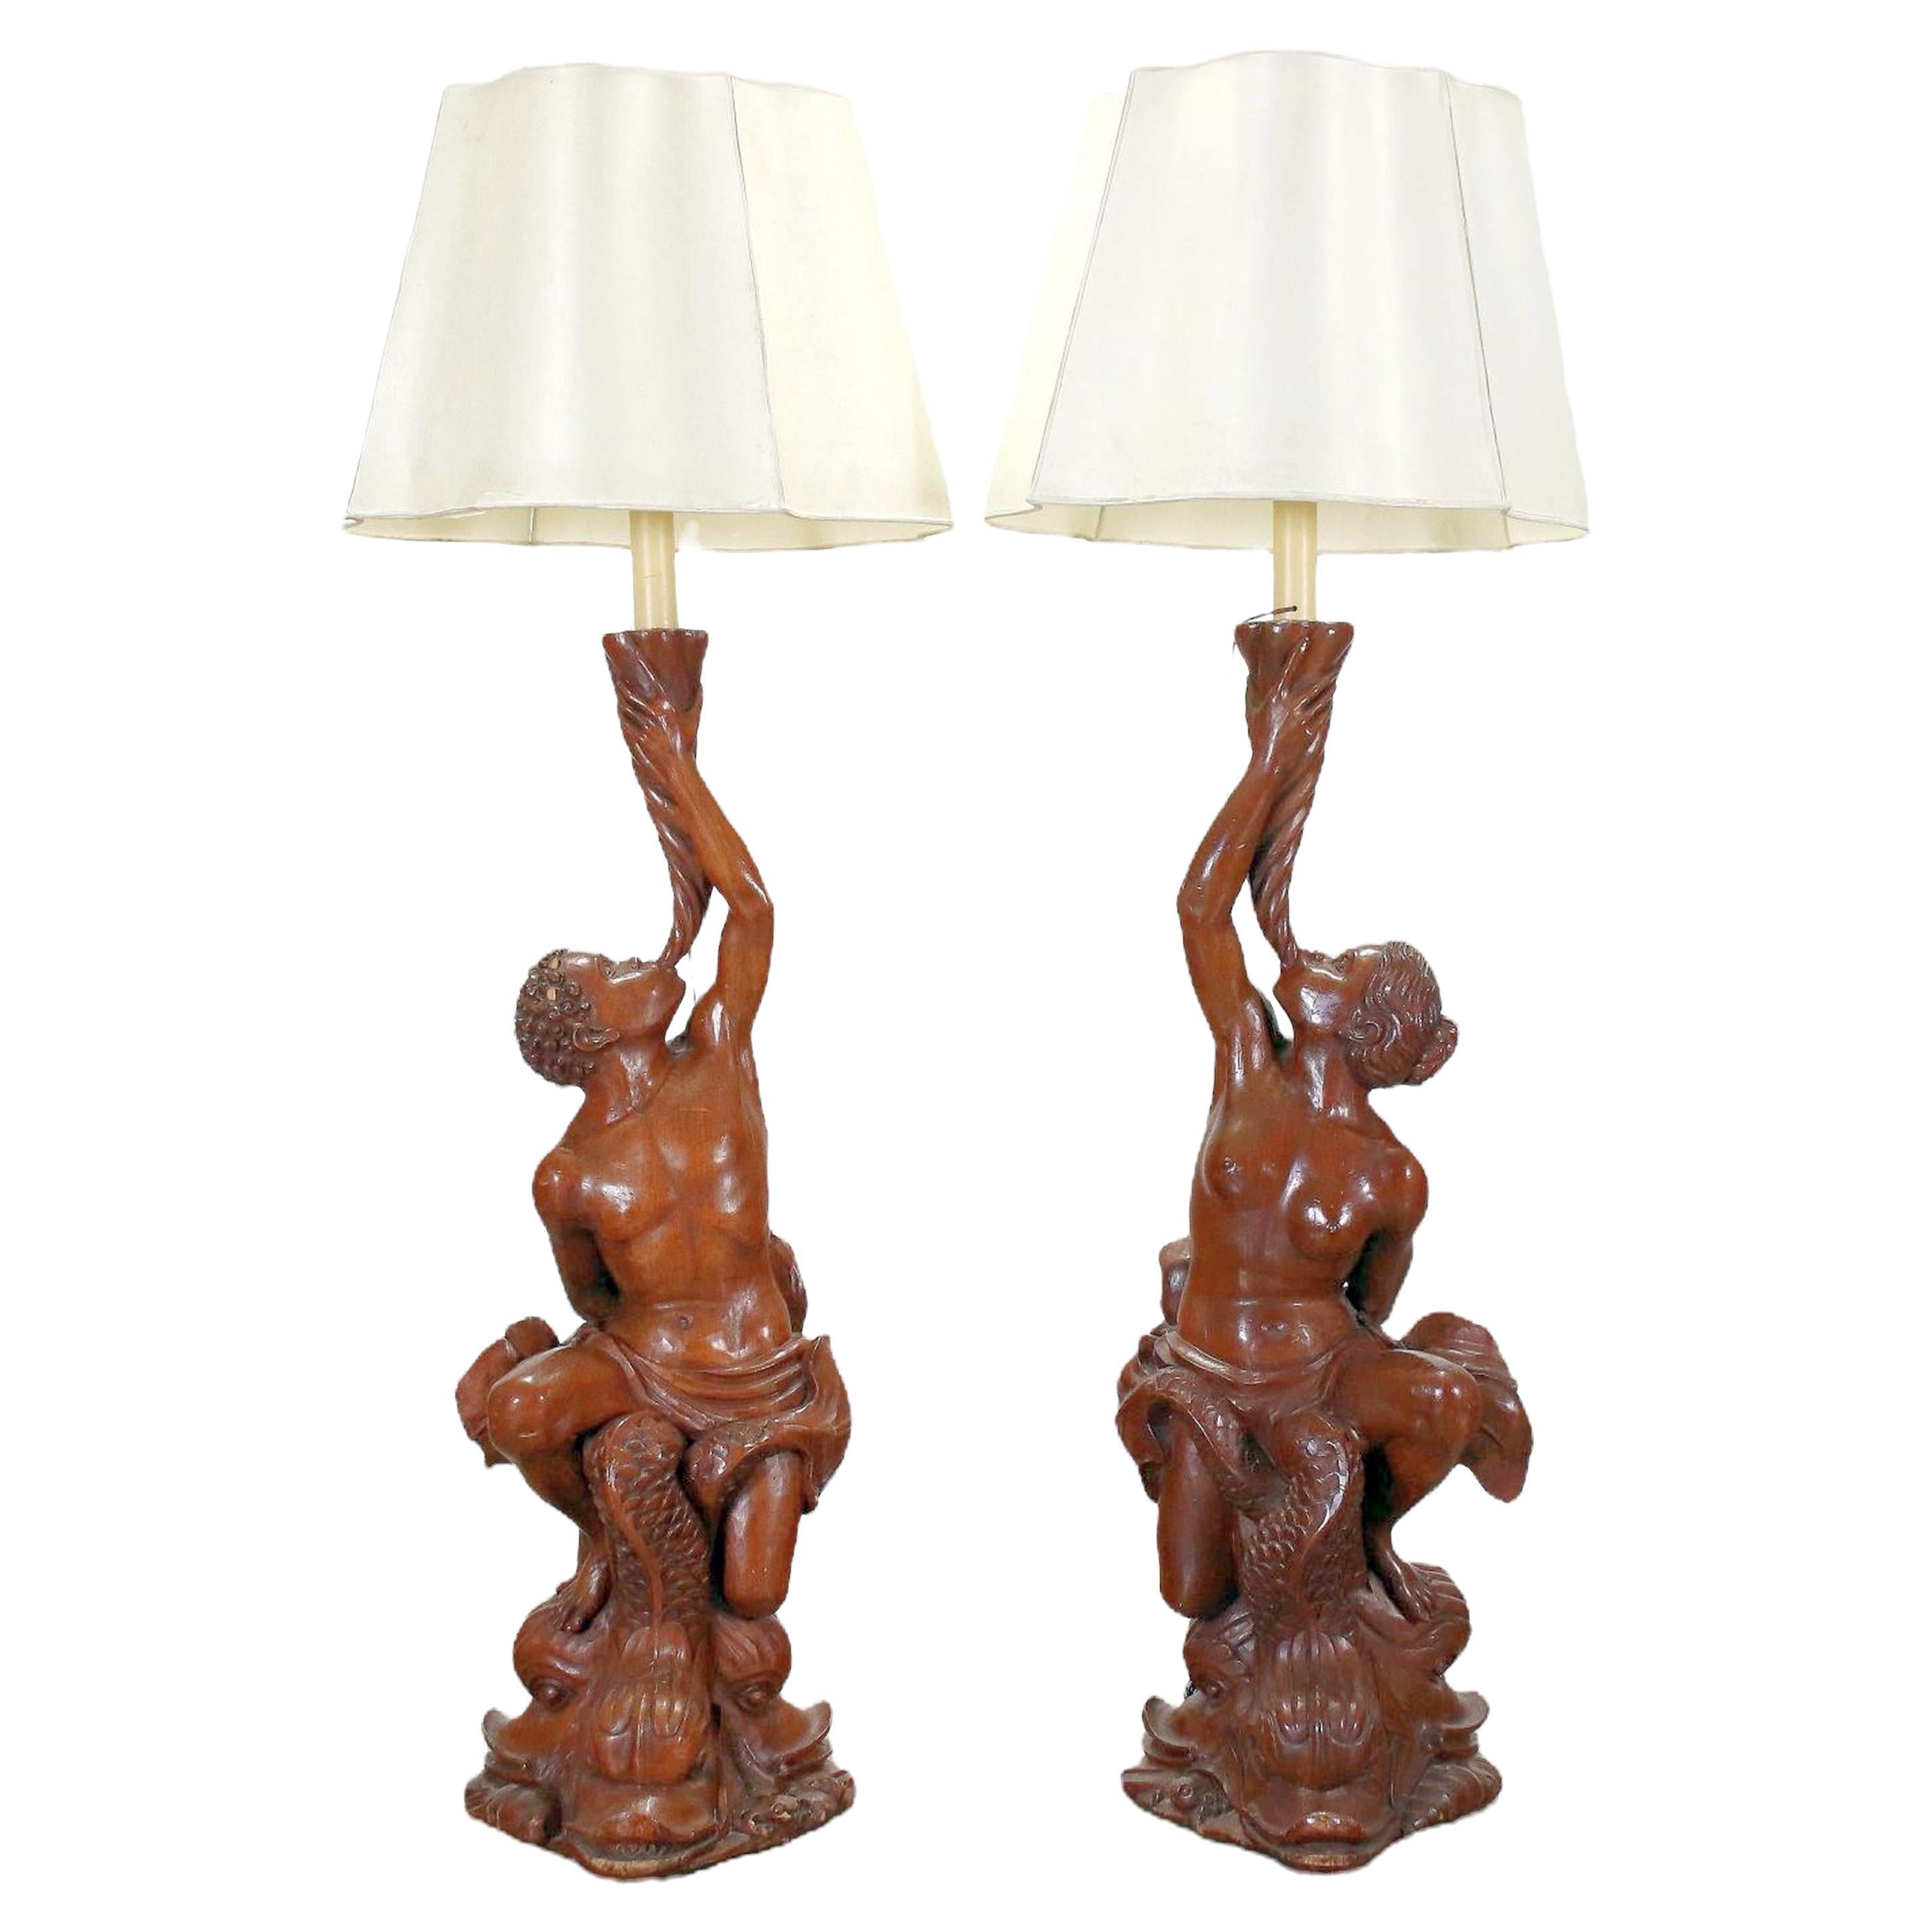 Pair of Italian Figural walnut Lamps - Circa 1820 For Sale